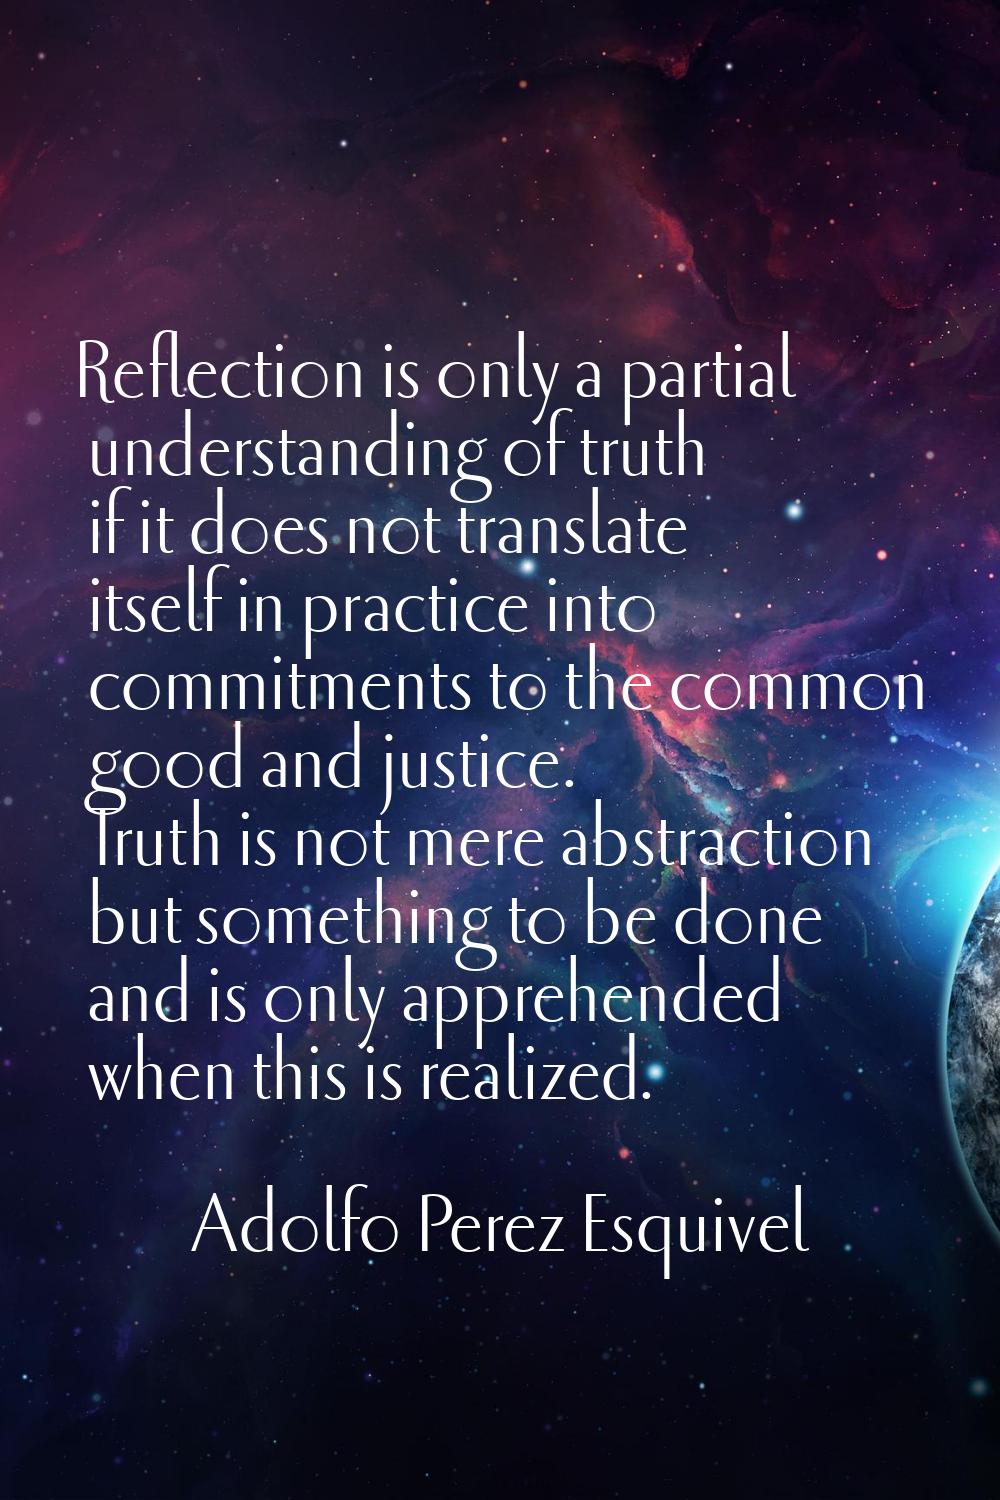 Reflection is only a partial understanding of truth if it does not translate itself in practice int